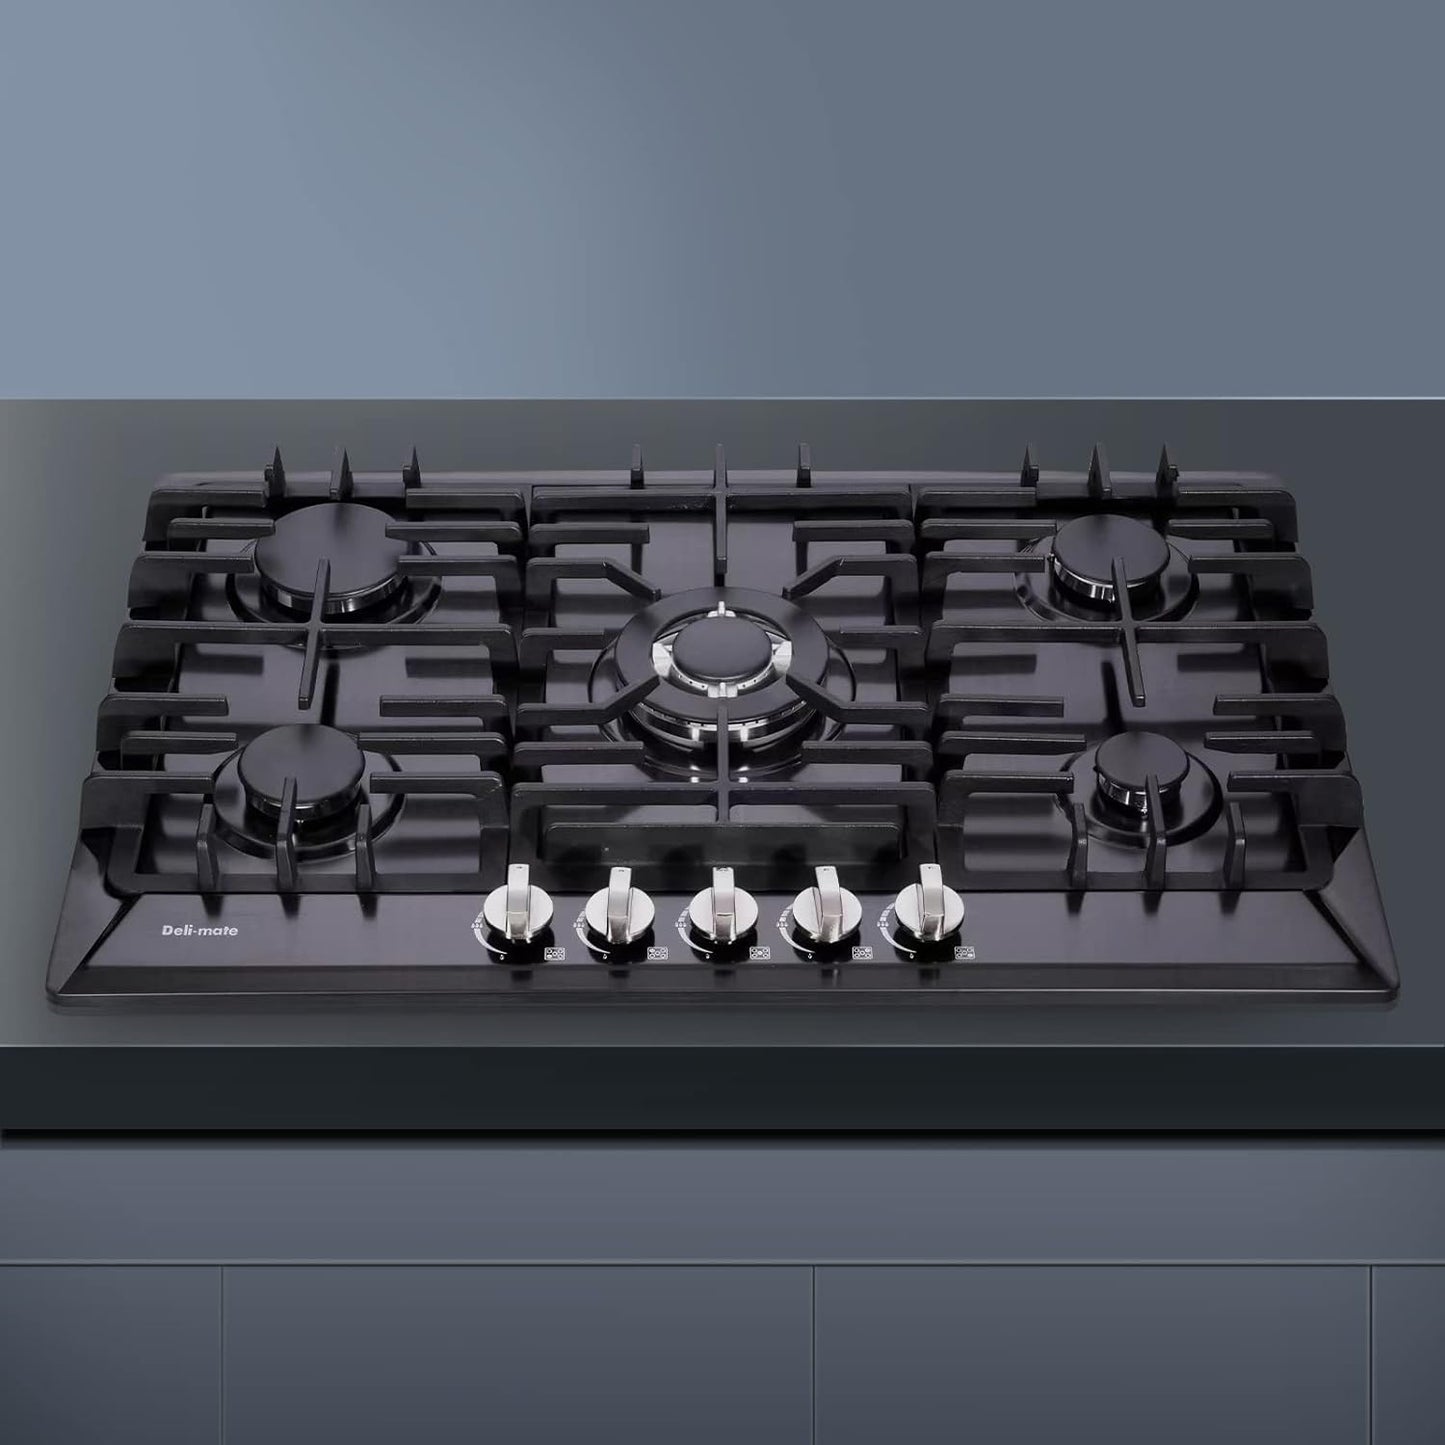 30 Inch Gas Cooktop, Built-in 5 Burners Stainless Steel Gas Stovetop LPG/NG Convertible Gas Stove Dual Fuel Gas Hob with Thermocouple Protection DM527-SA02B